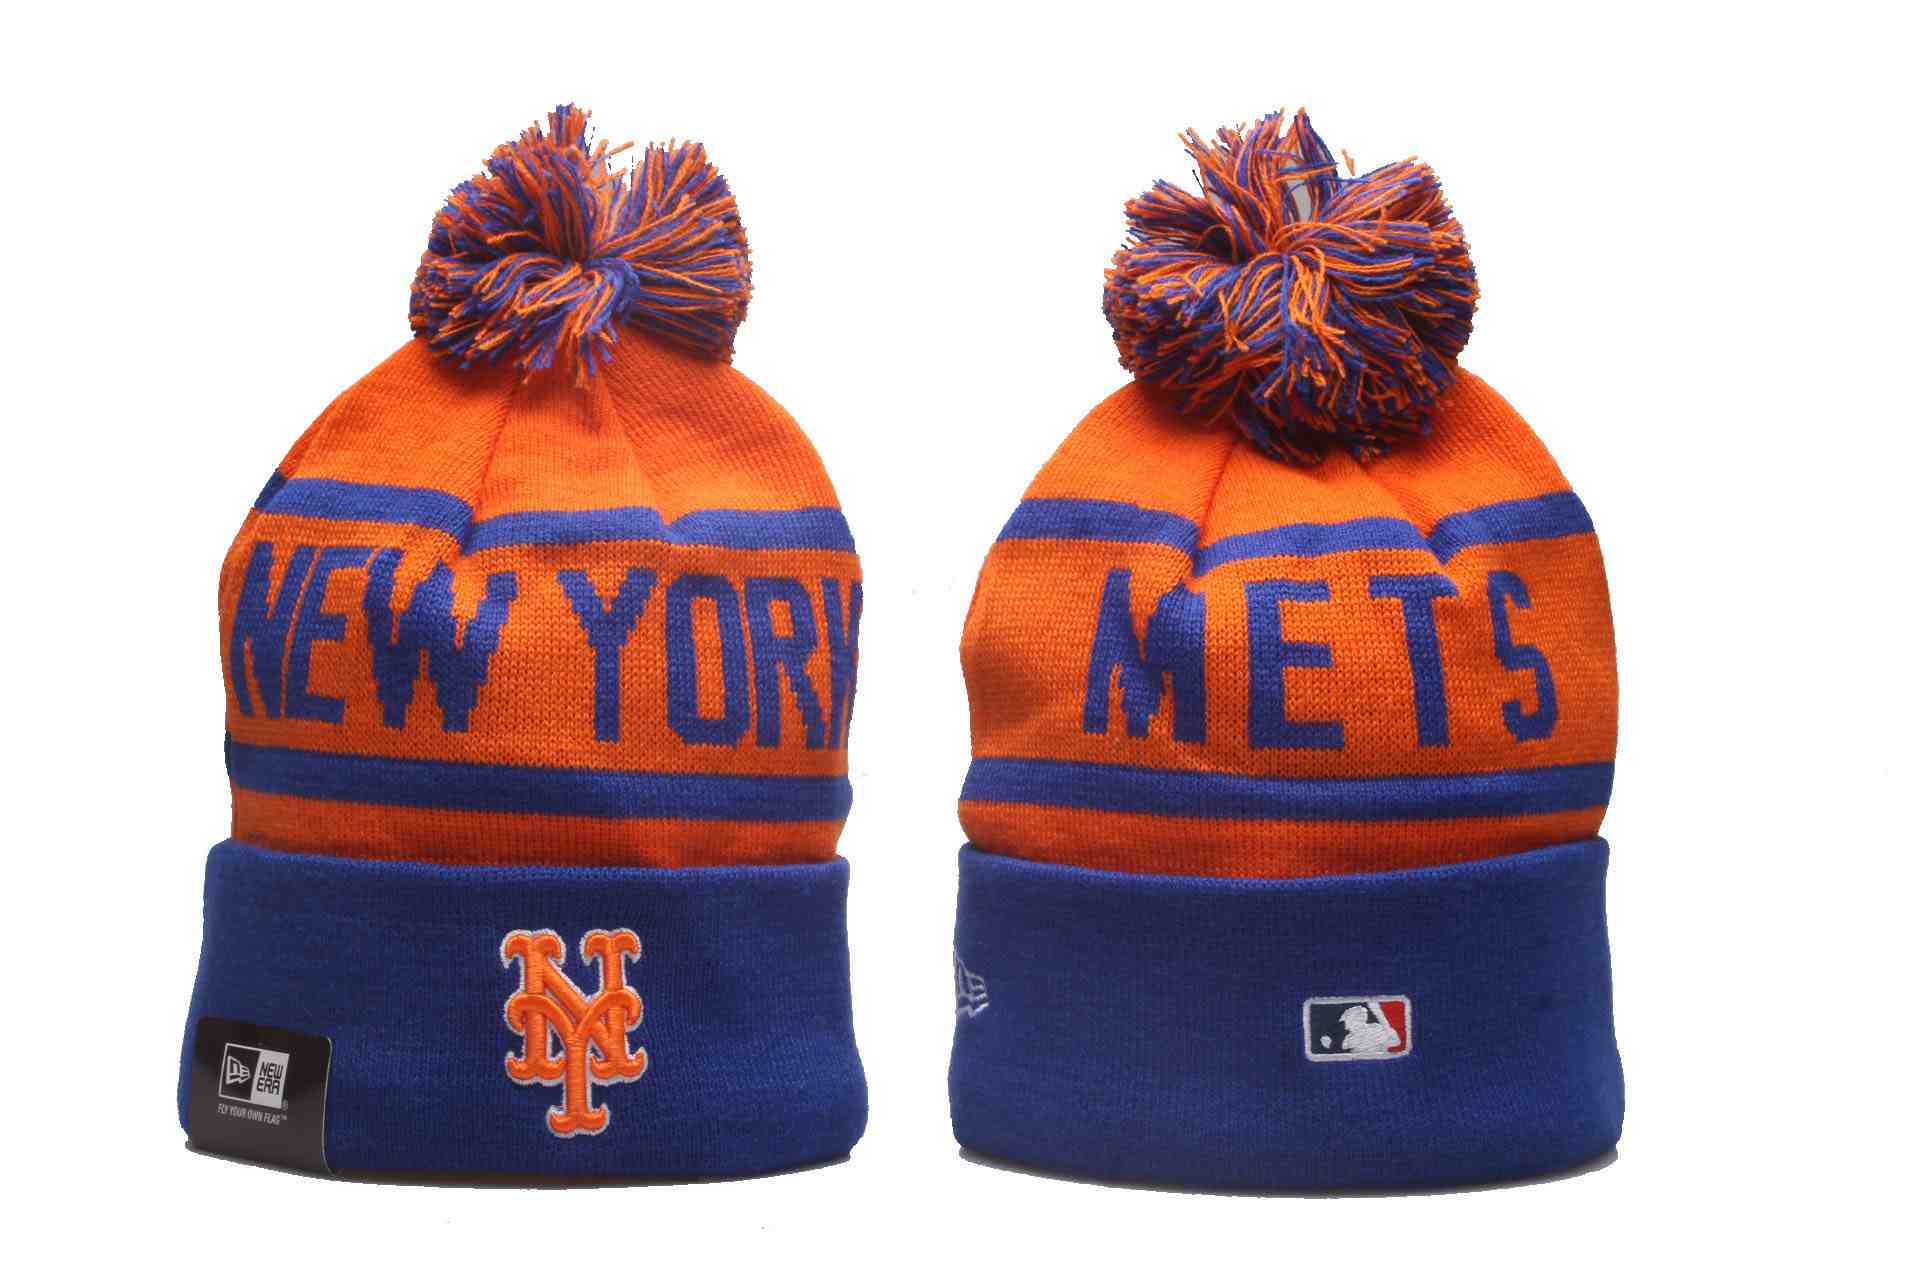 NEW YORK METS knit hat YP